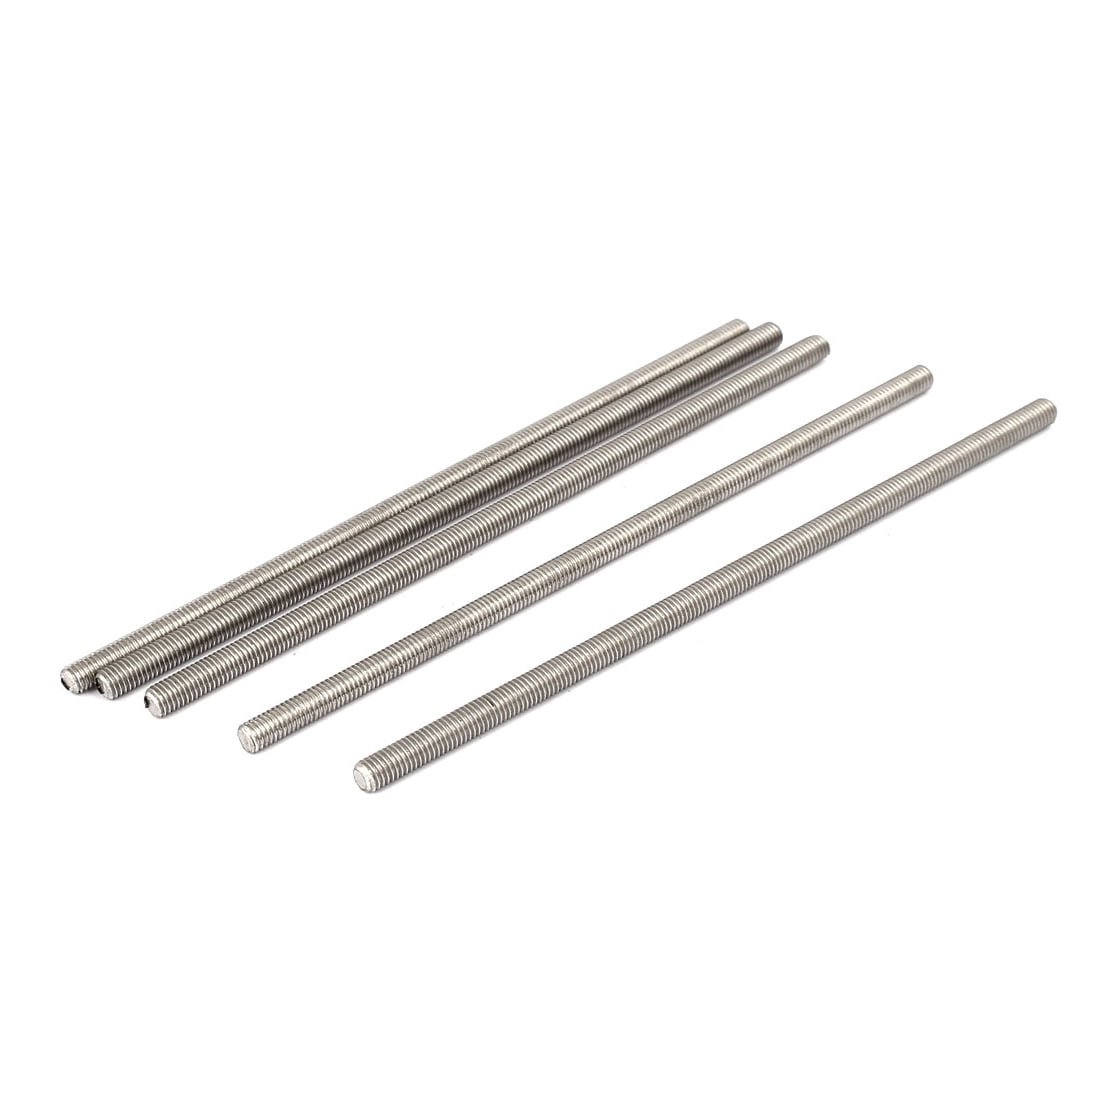 M10 x 140mm 304 Stainless Steel Fully Threaded Rods Bar Studs Hardware 5 Pcs 